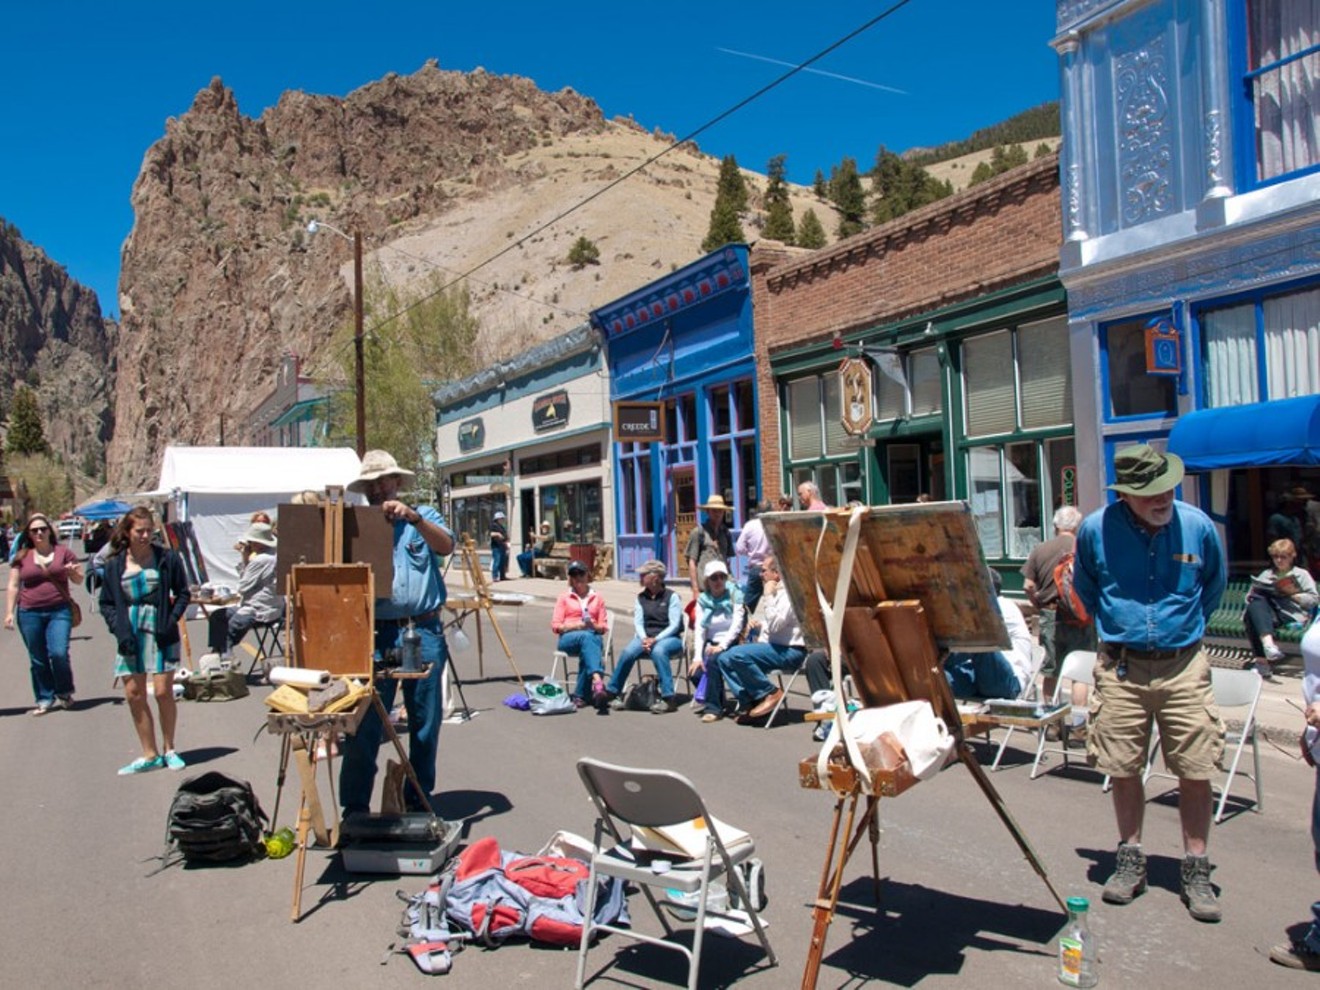 Artists at work on Main Street in Creede over Memorial Day weekend.